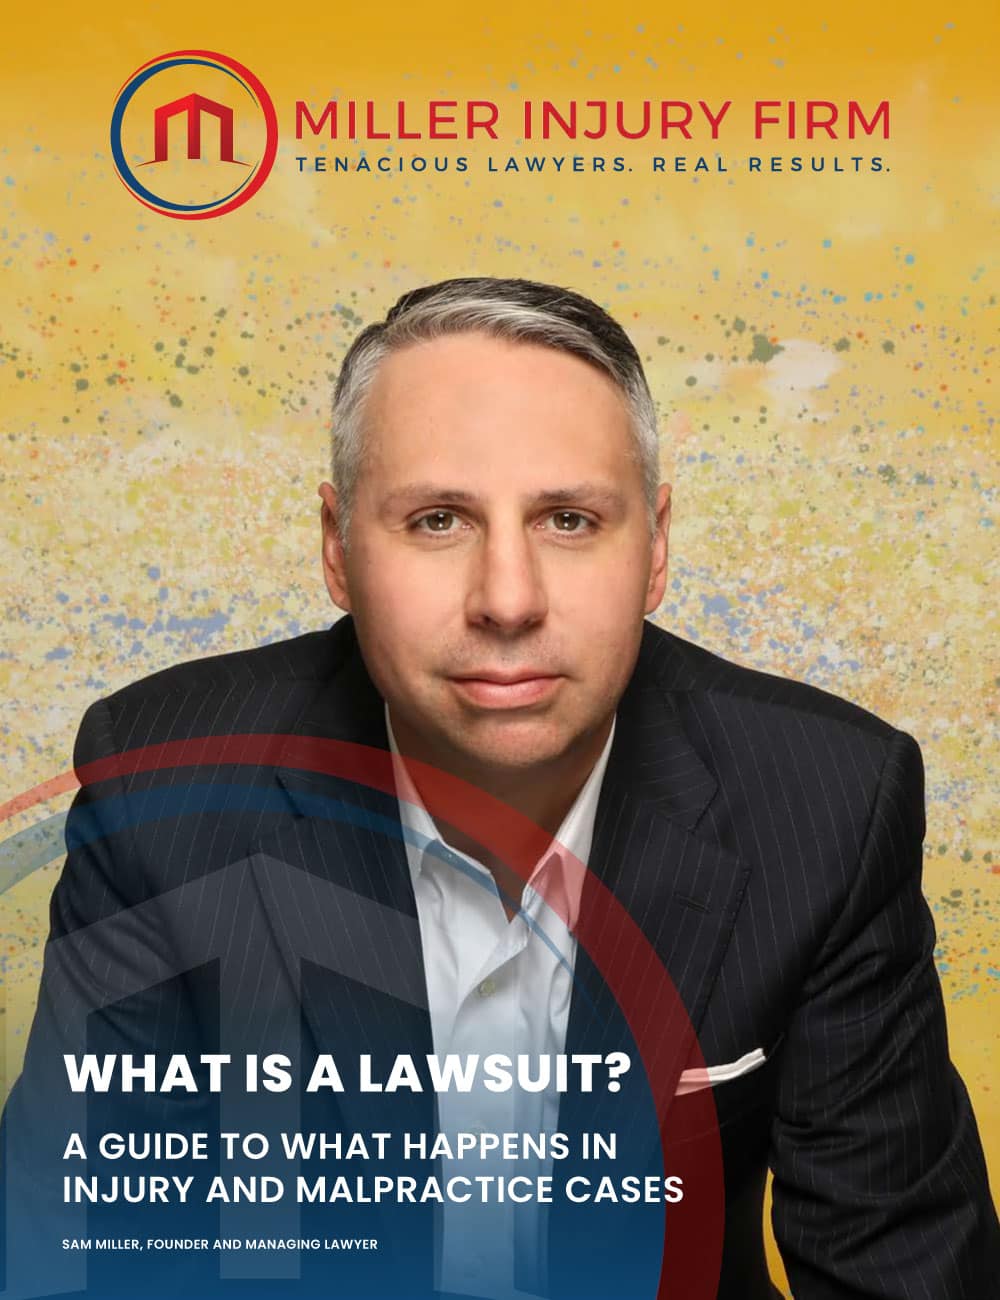 Miller Injury Firm. Tenacious Lawyers. Real Results. What is a lawsuit? A guide to what happens in injury and malpractice cases by Sam Miller.